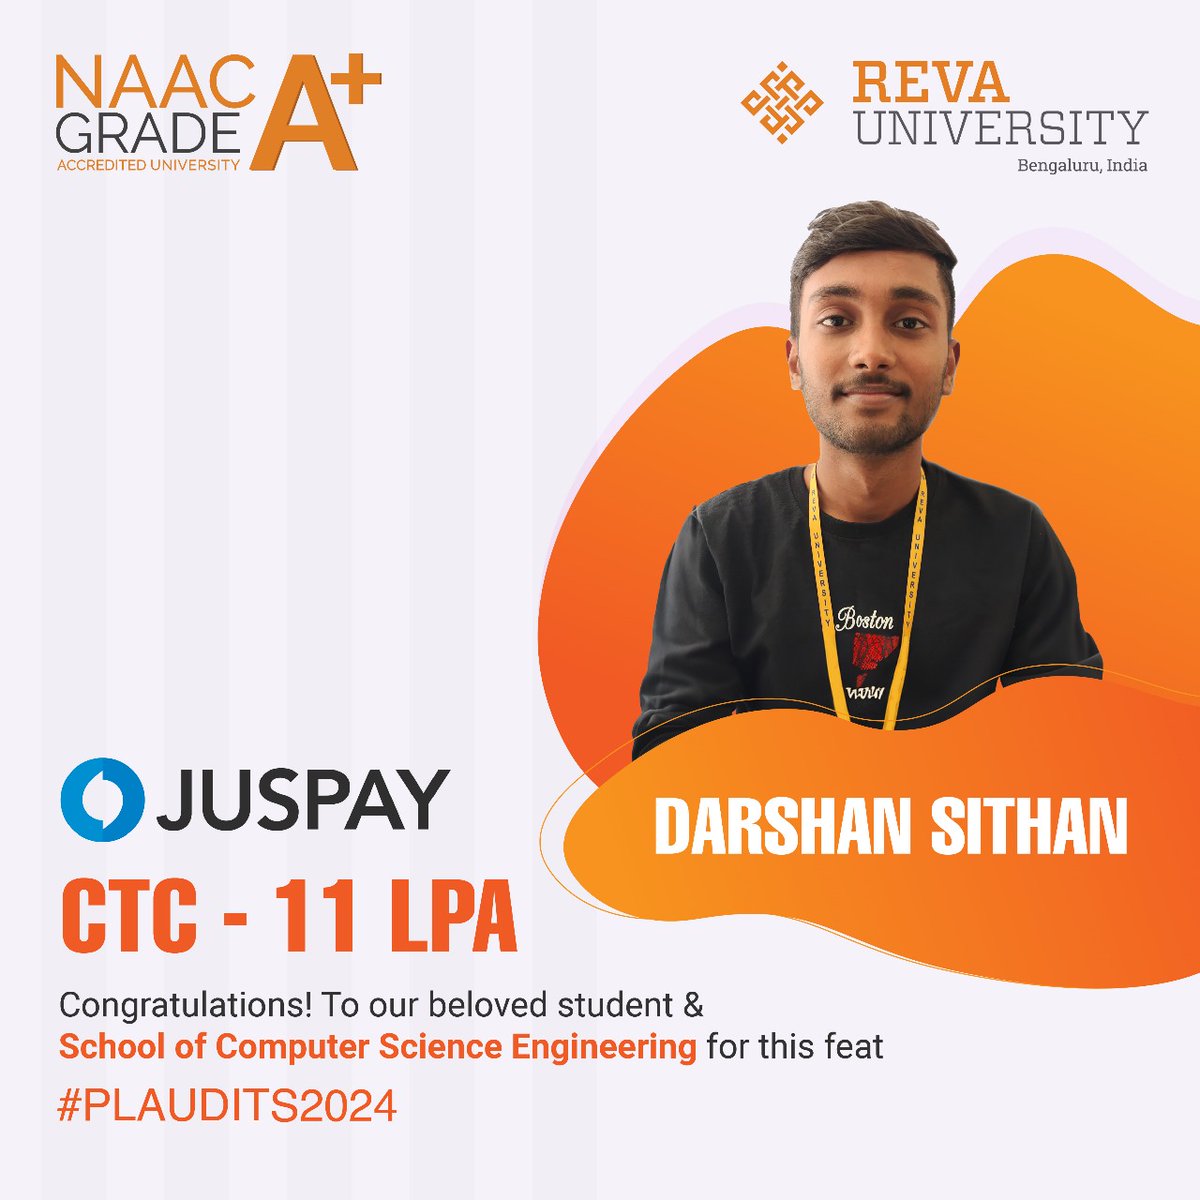 Another milestone achieved! Darshan Sithan, a proud student of REVA University's School of Computer Science and Engineering, has landed a stellar placement at Juspay with an impressive CTC of 11 LPA. Keep shining bright! 

#SuccessStory #REVAUniversity #CampusPlacement